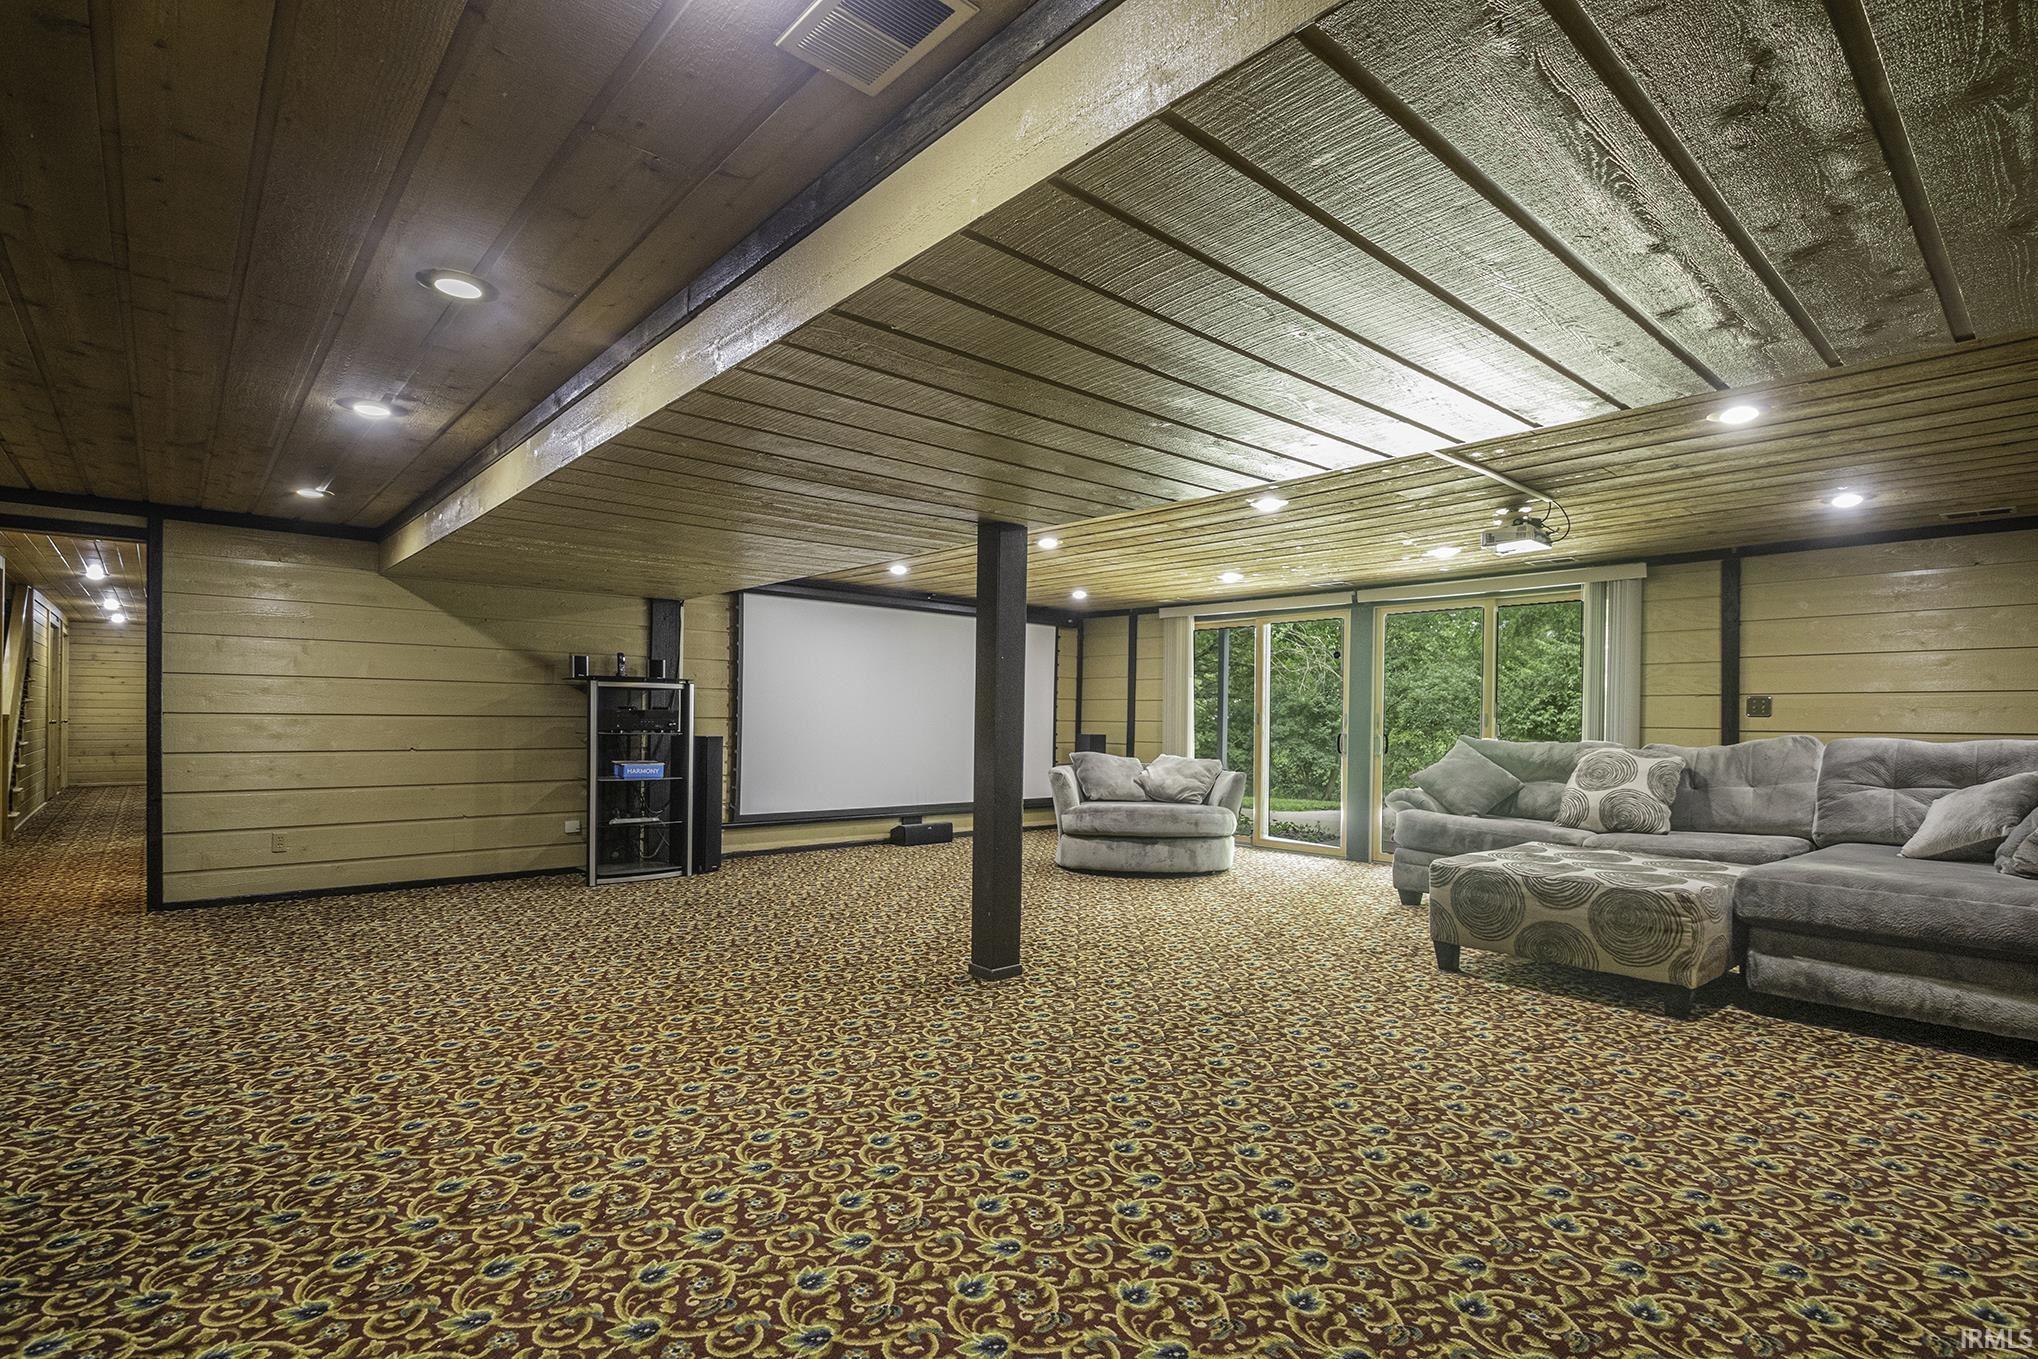 Home Theater and Surround Sound with walk out to backyard and creek